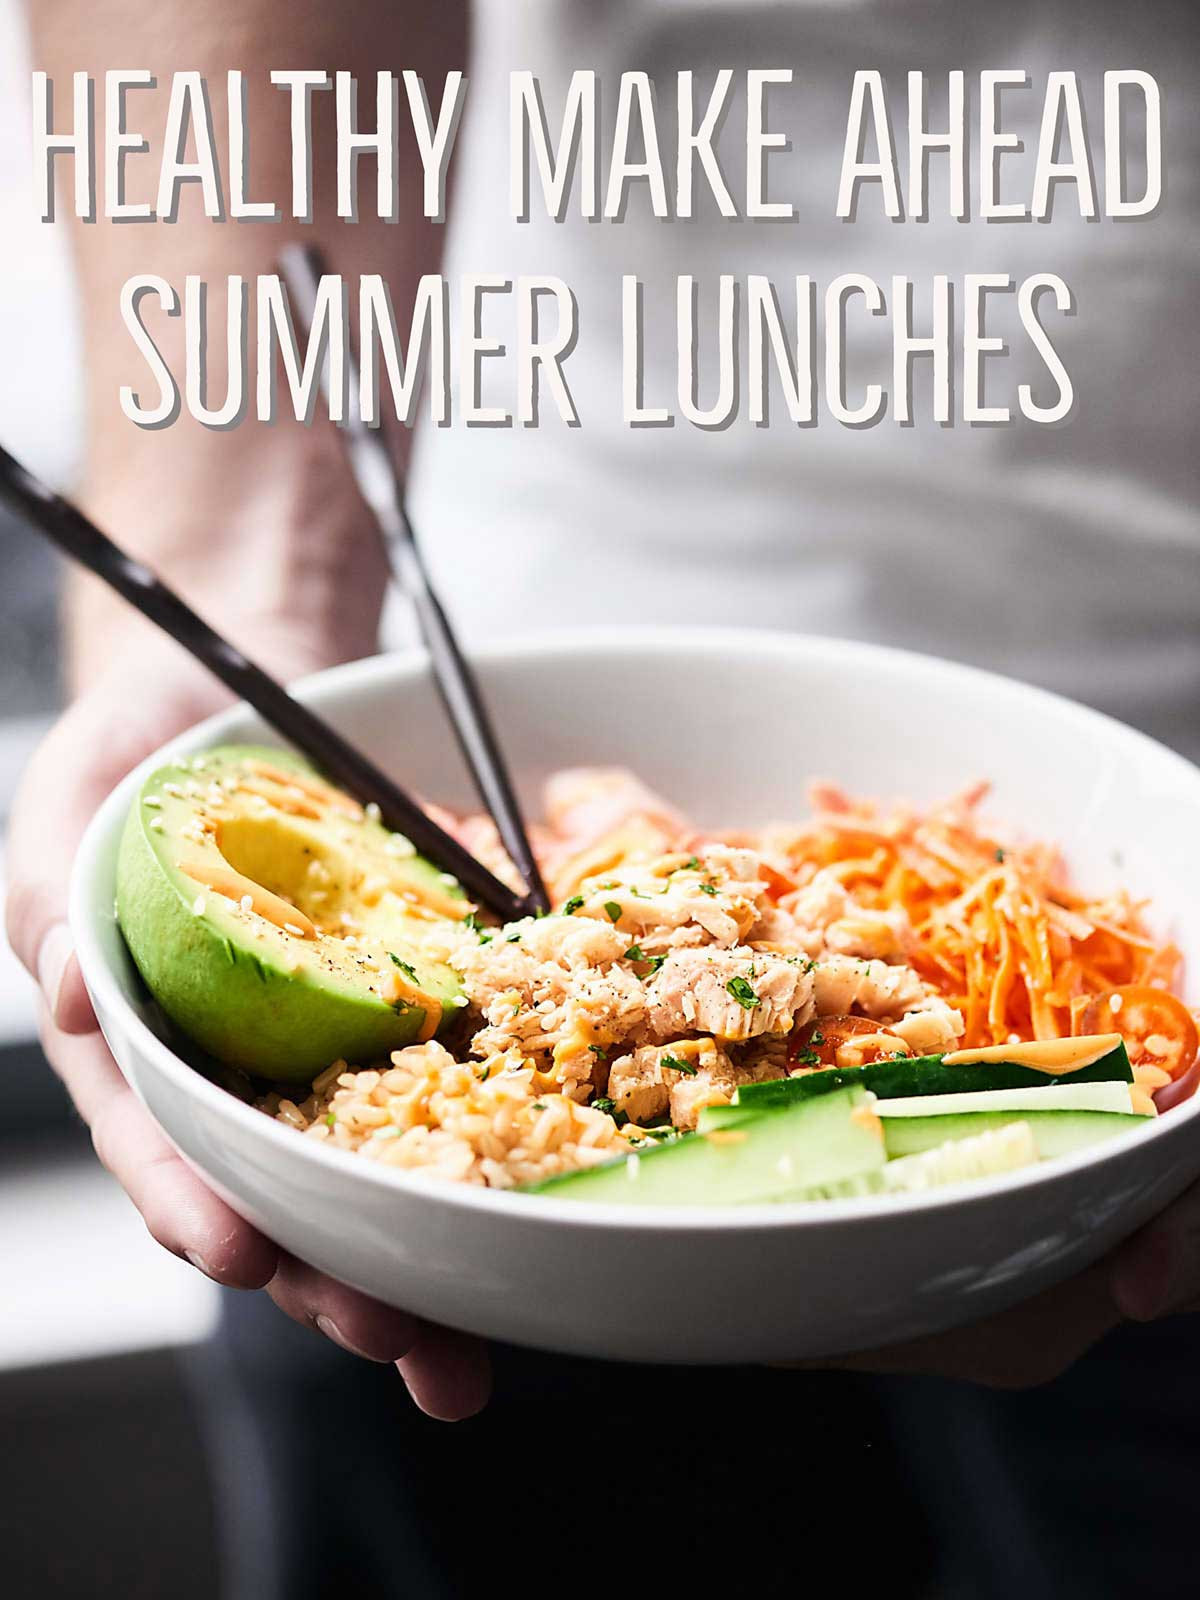 Healthy Make Ahead Lunches
 Easy Healthy Make Ahead Summer Lunches That Aren t All